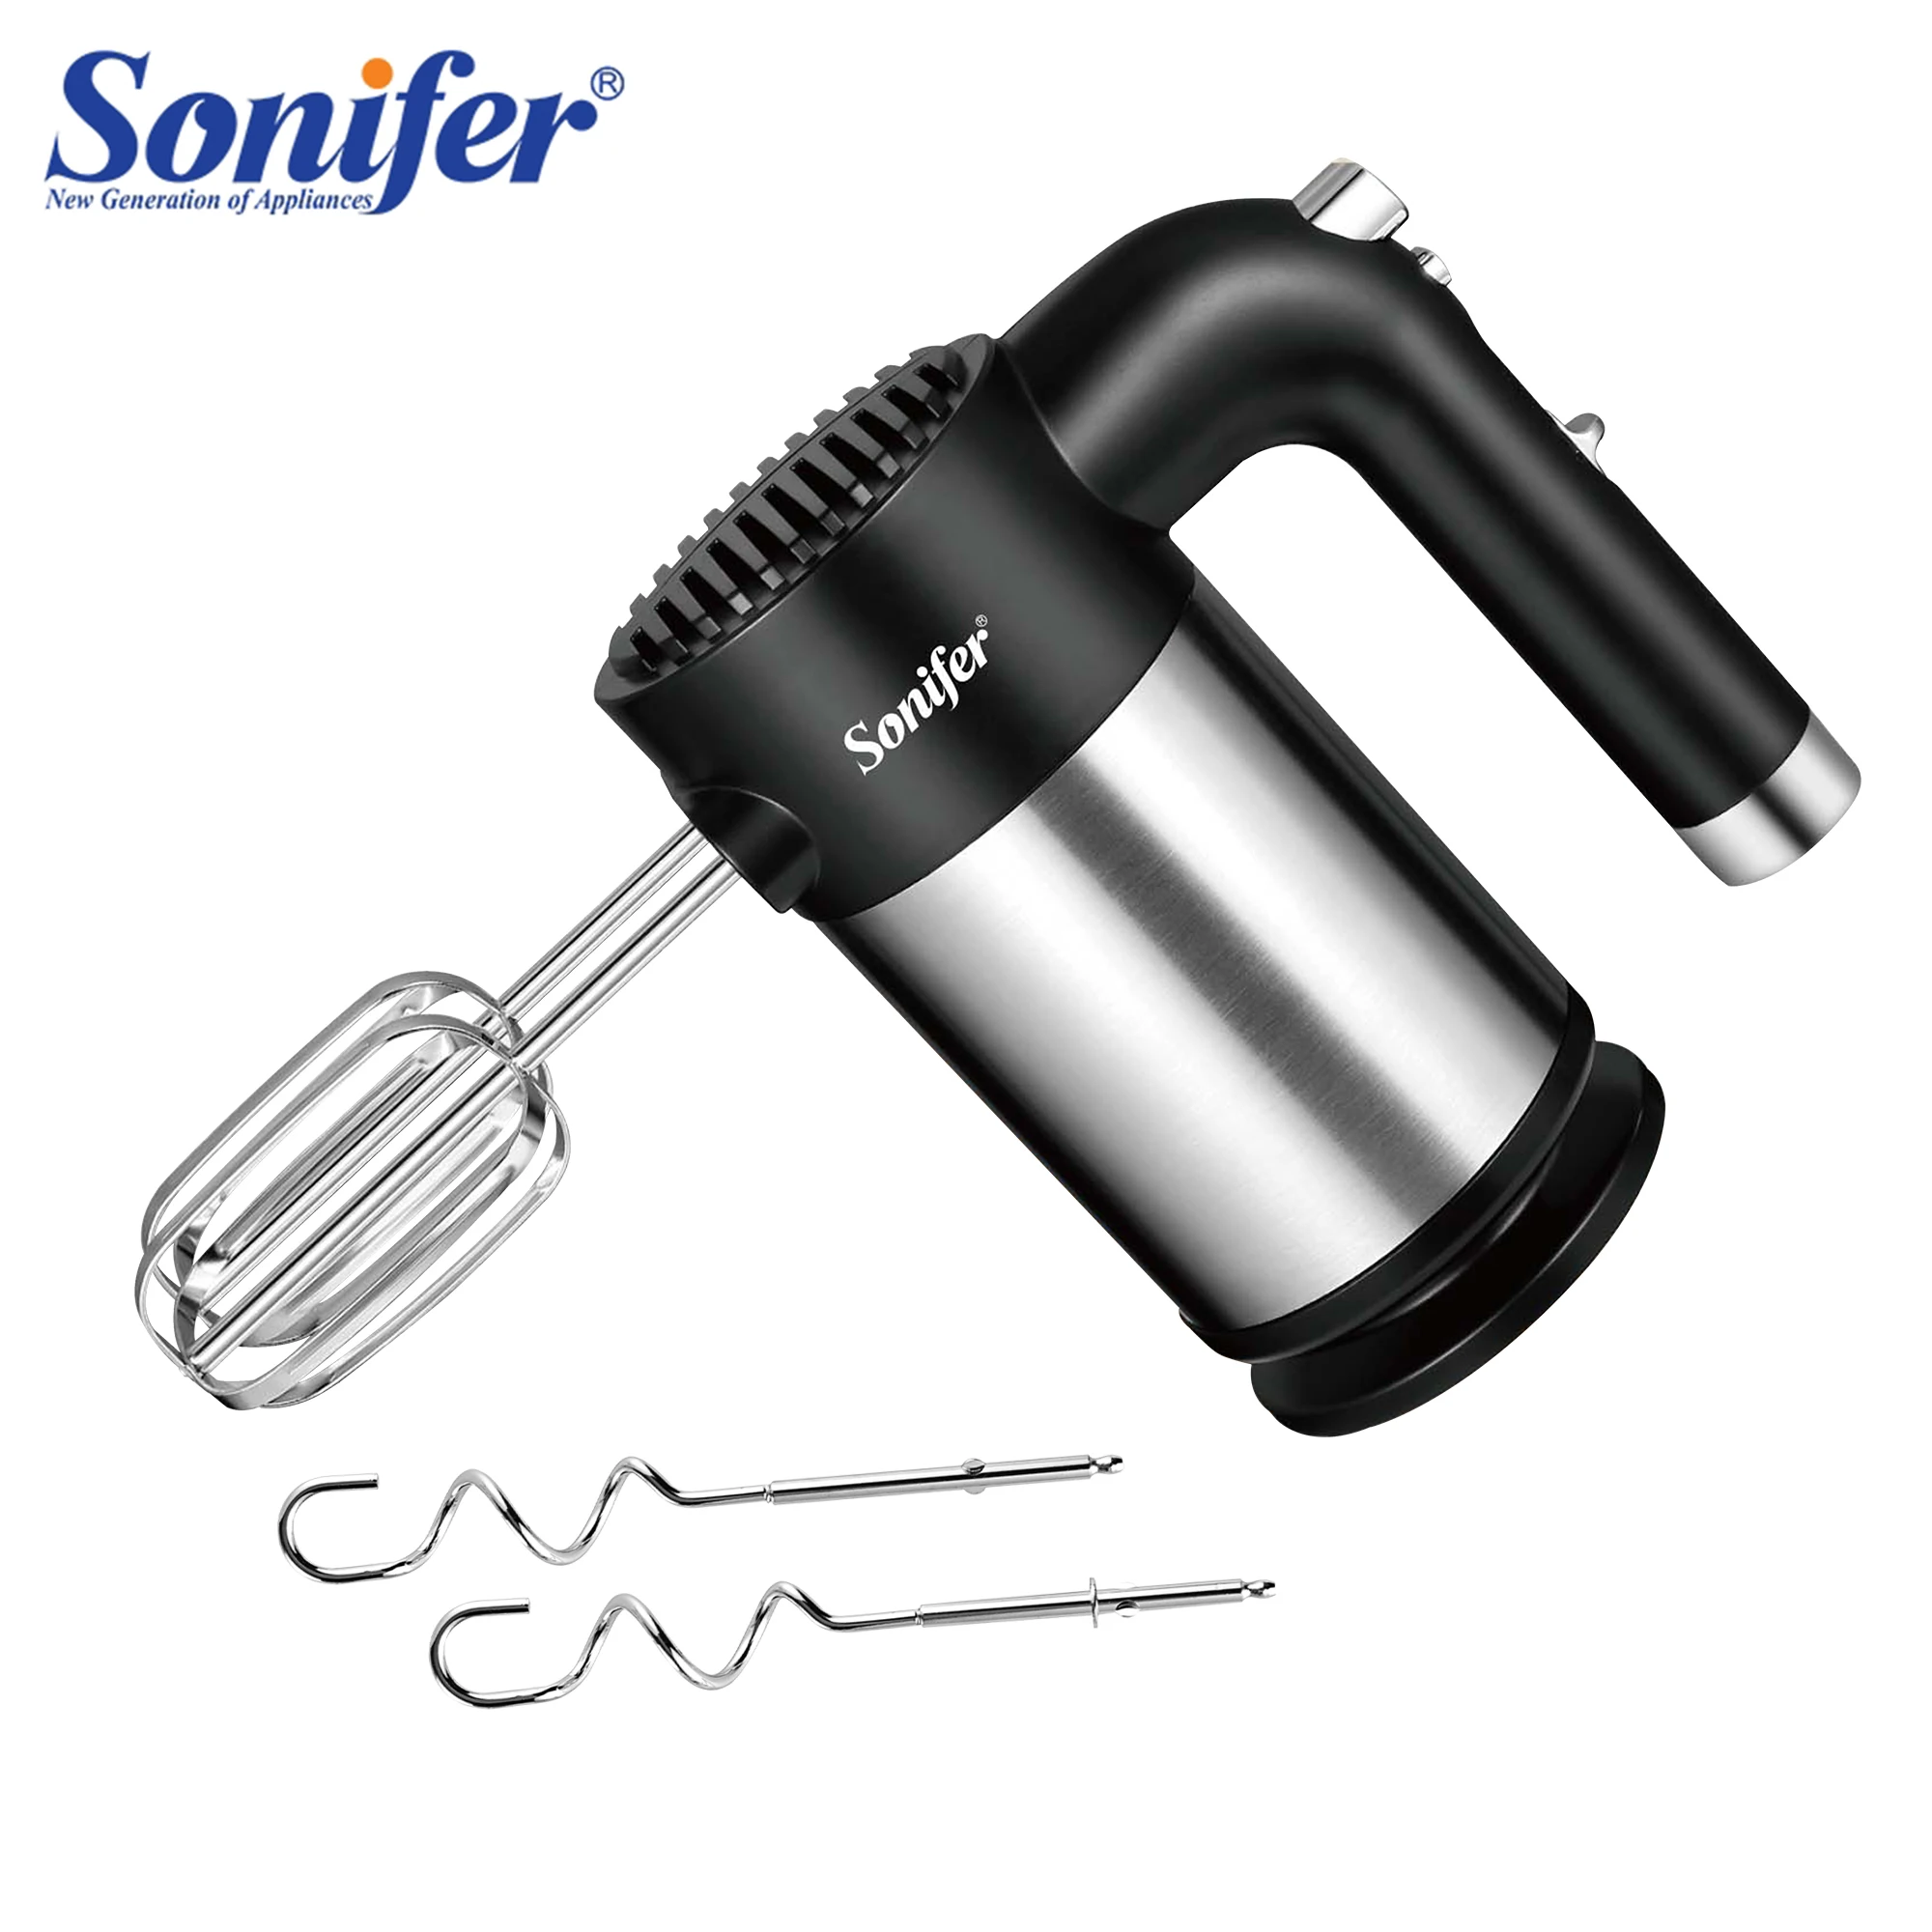 

300W Food Mixer Electric Cuisine Kitchen Blender With Dough Hooks Chrome Egg Beater Hand Mixer Machine For Sweets Bakery Sonifer